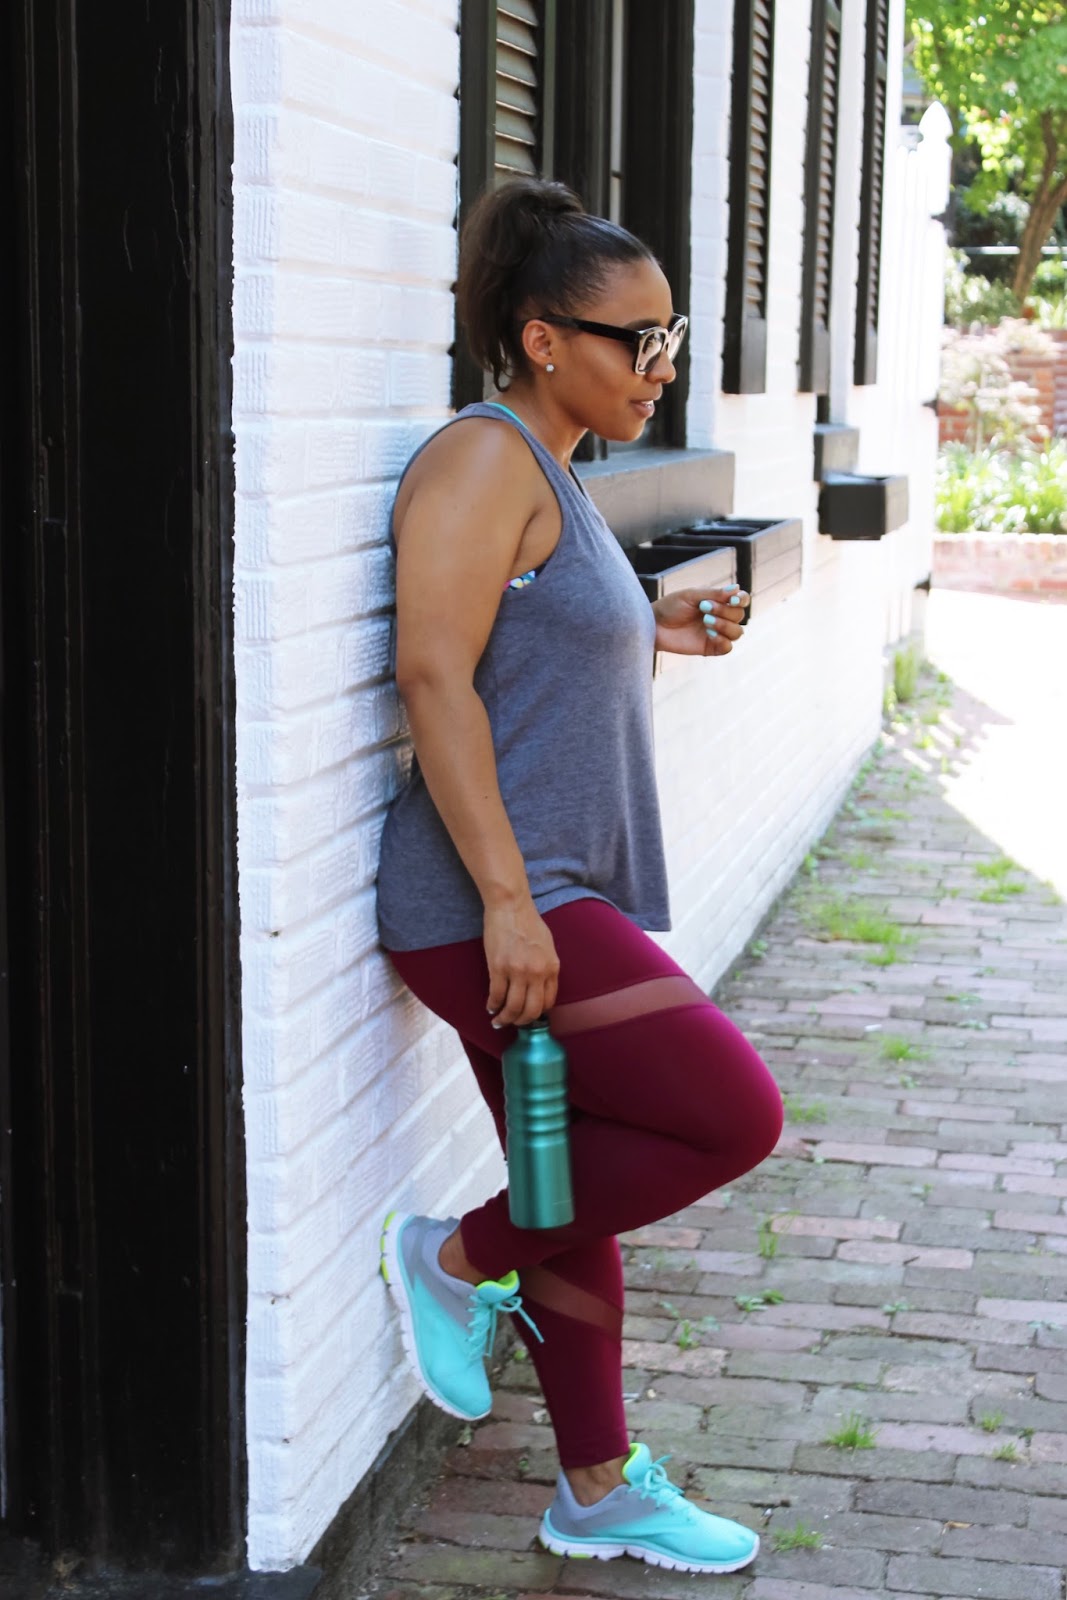 patty's kloset cute workout clothes that will motivate